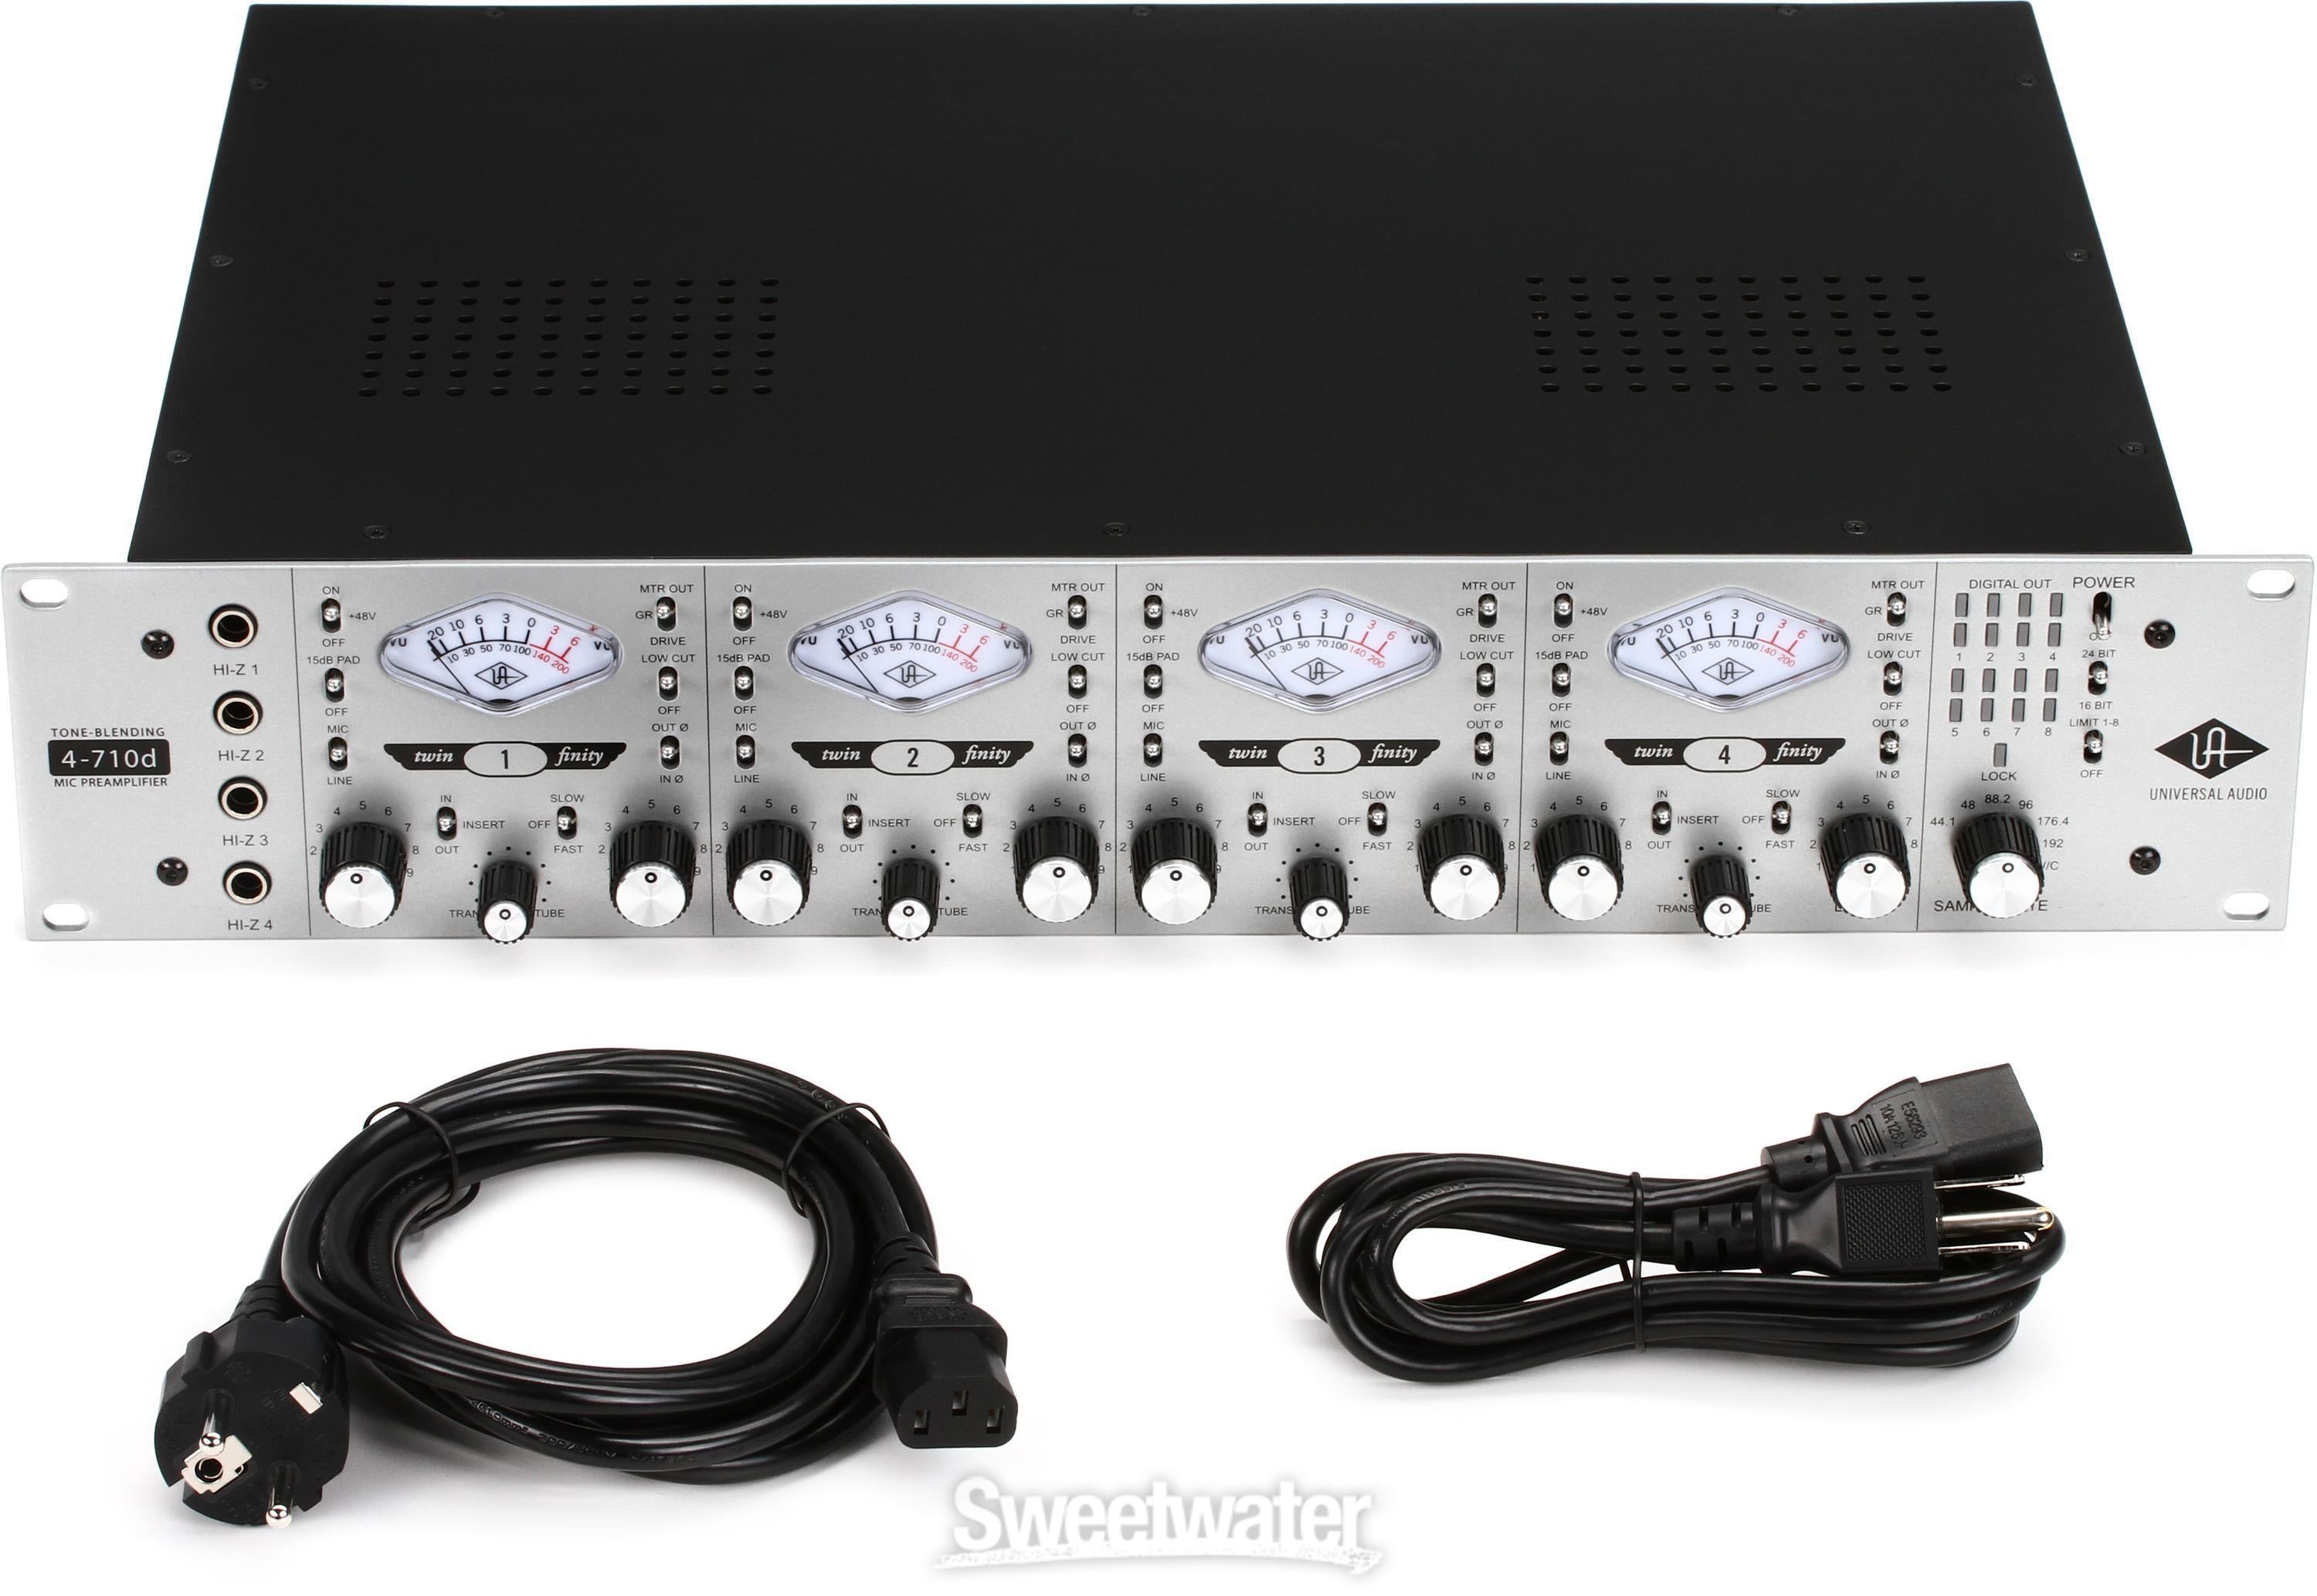 Universal Audio 4-710d 4-channel Microphone Preamp u0026 Compressor | Sweetwater